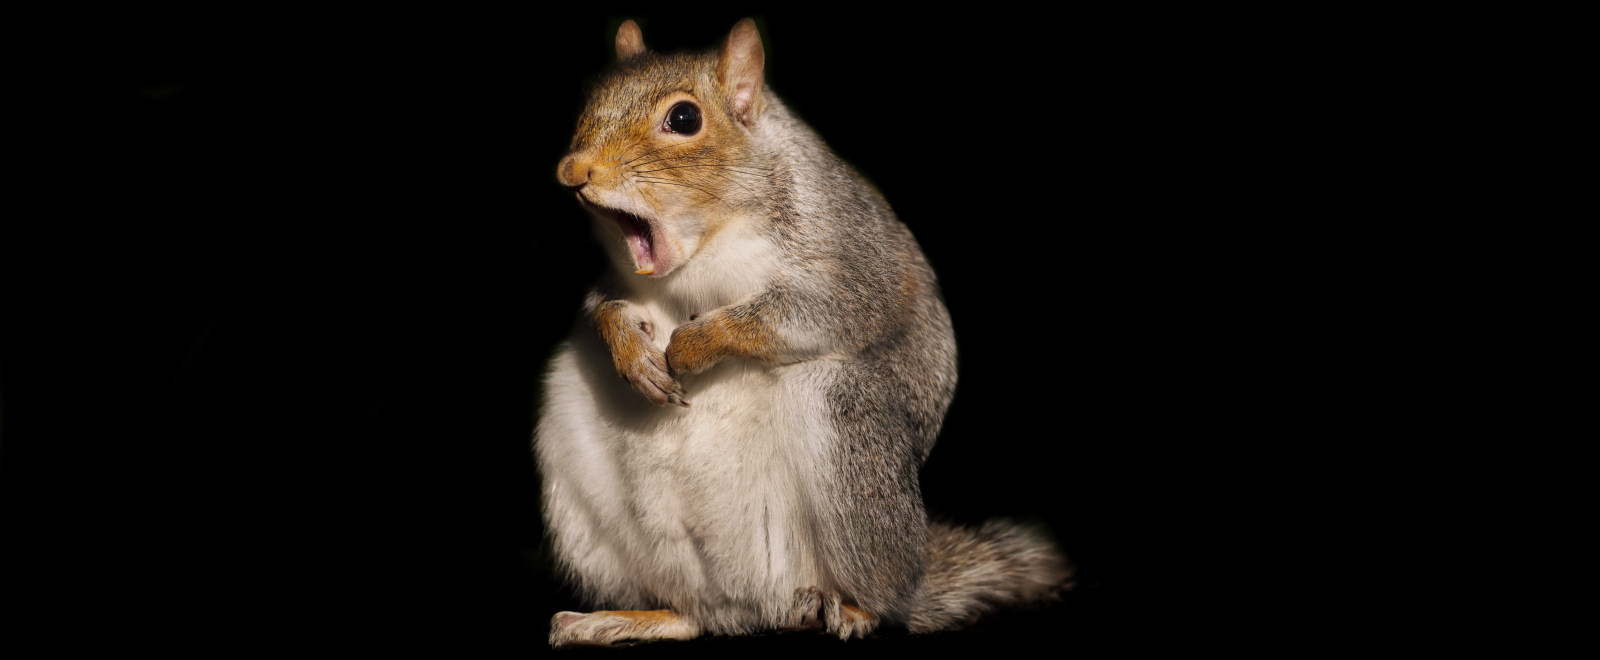 Grey squirrel pest in Llanelli or Swansea in South Wales